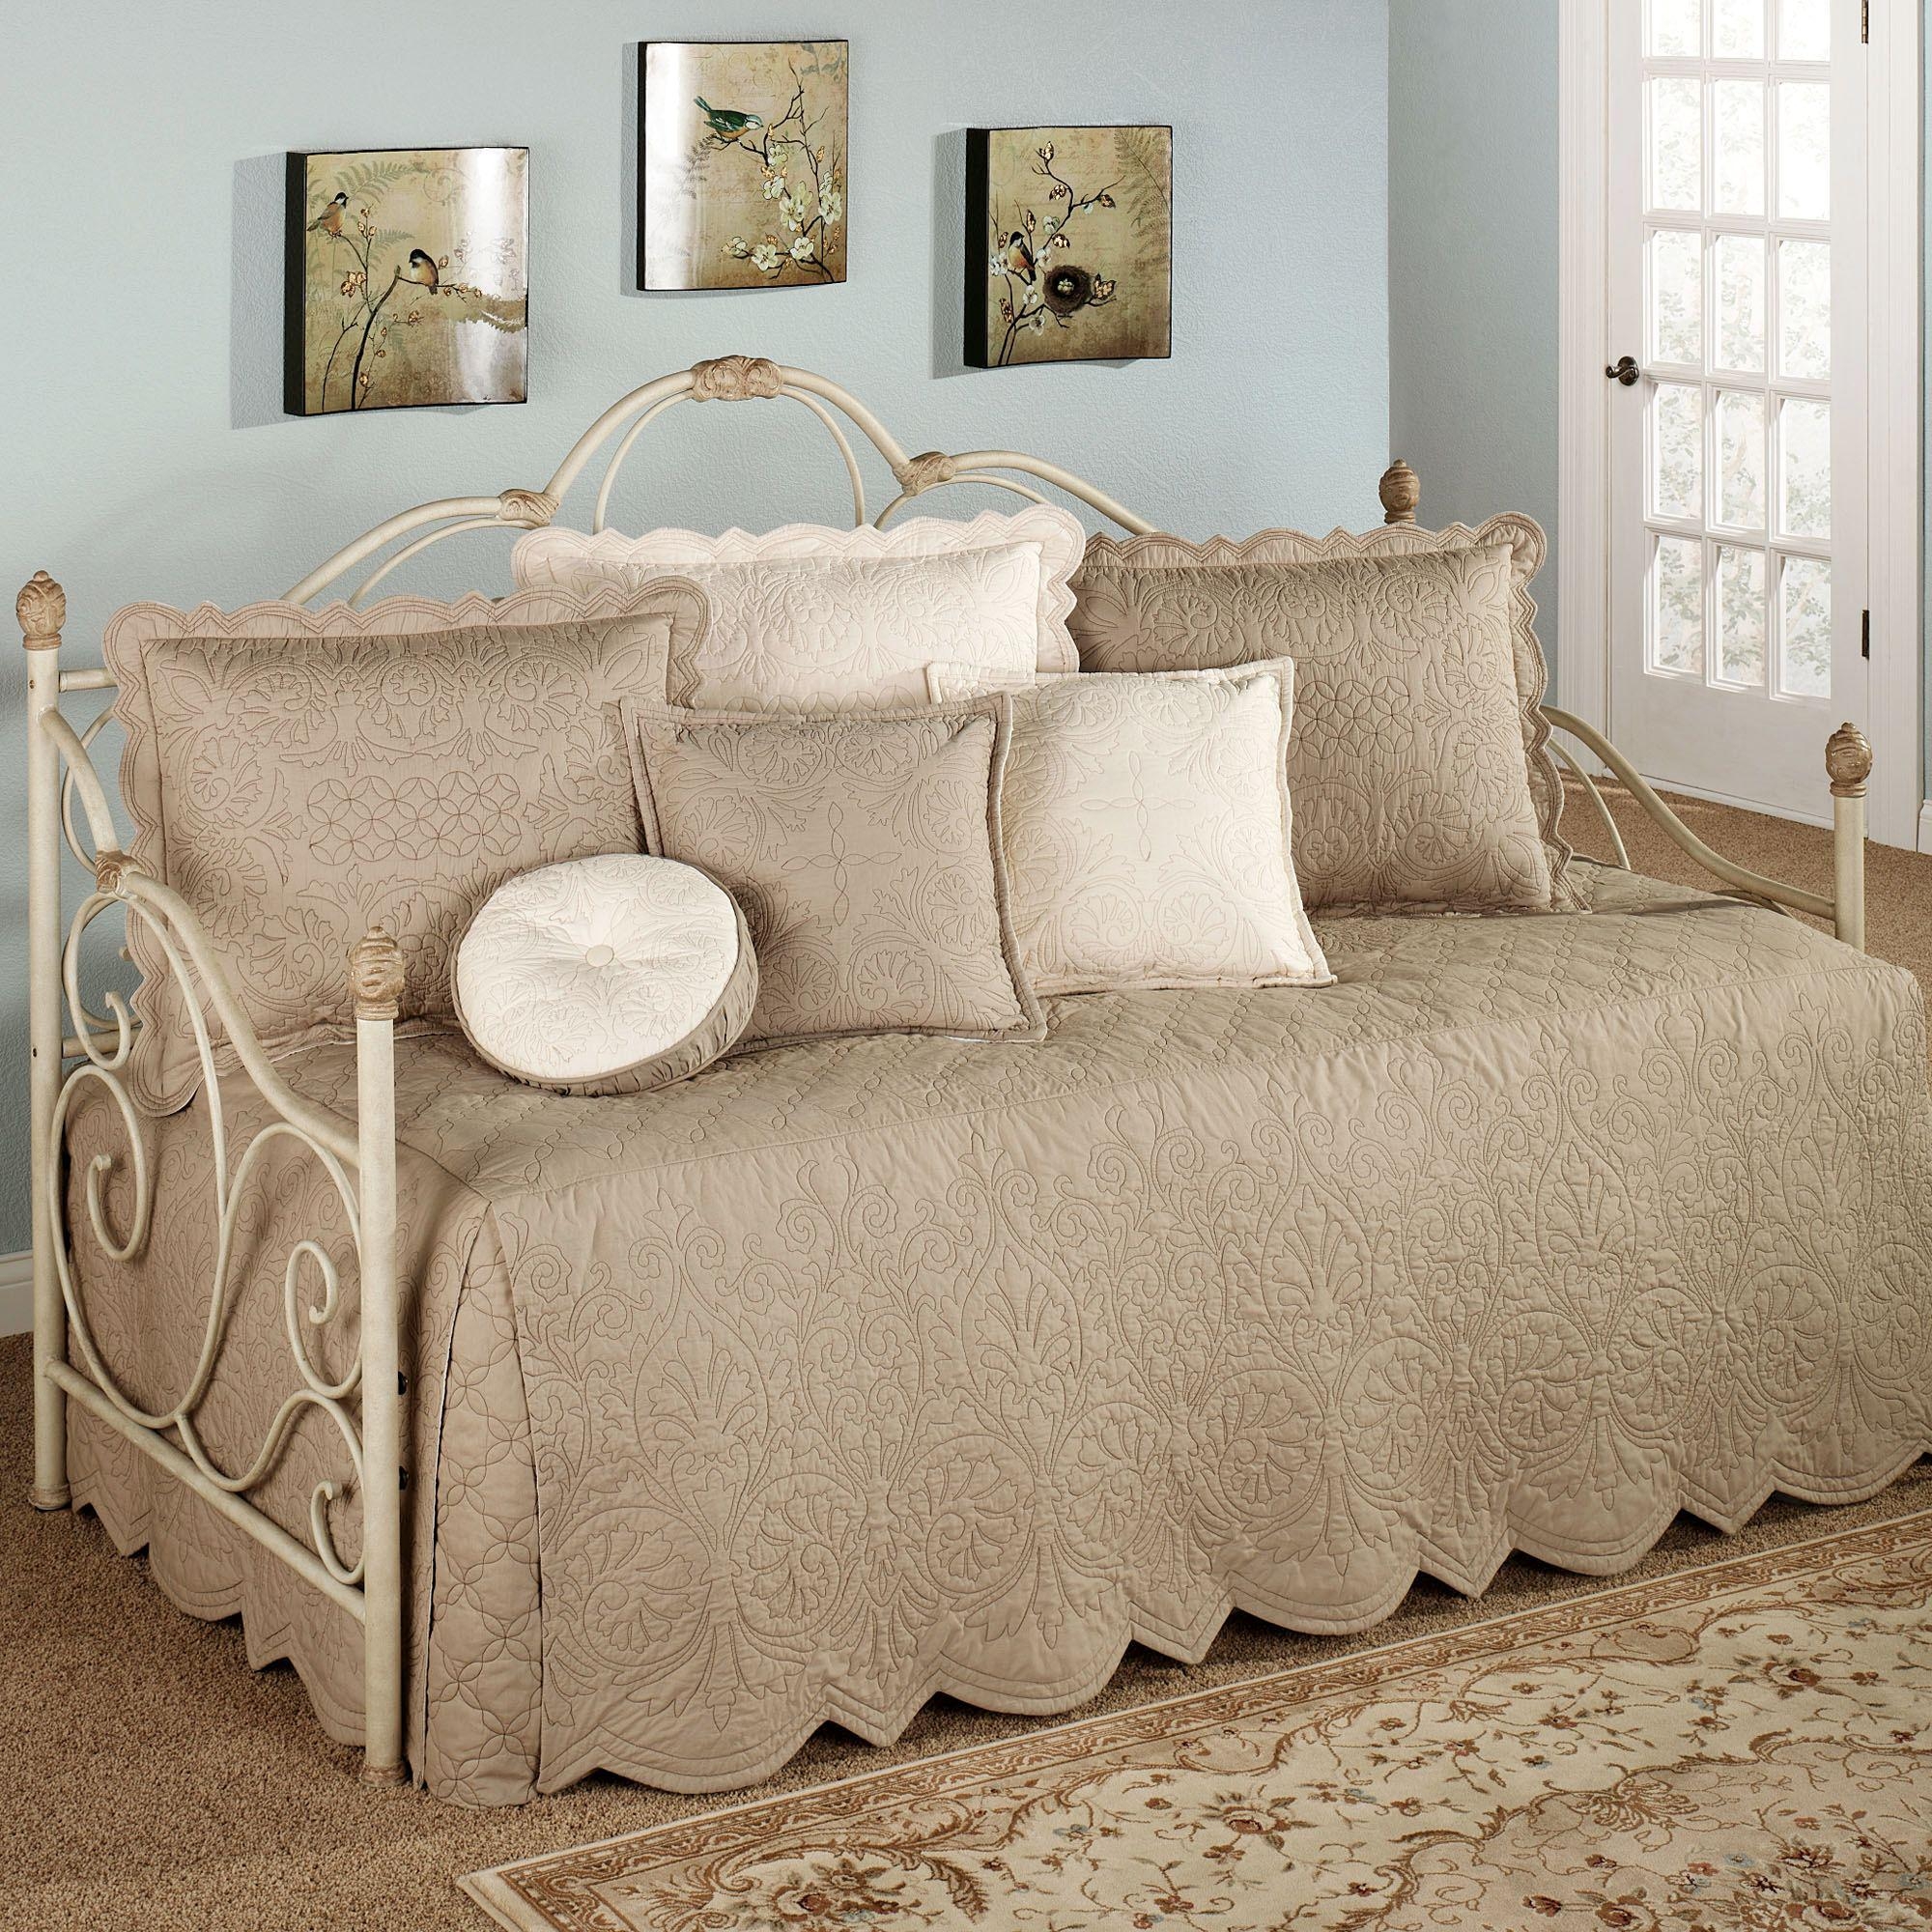 In bedding for daybeds butterfly bedding discount daybed bedding